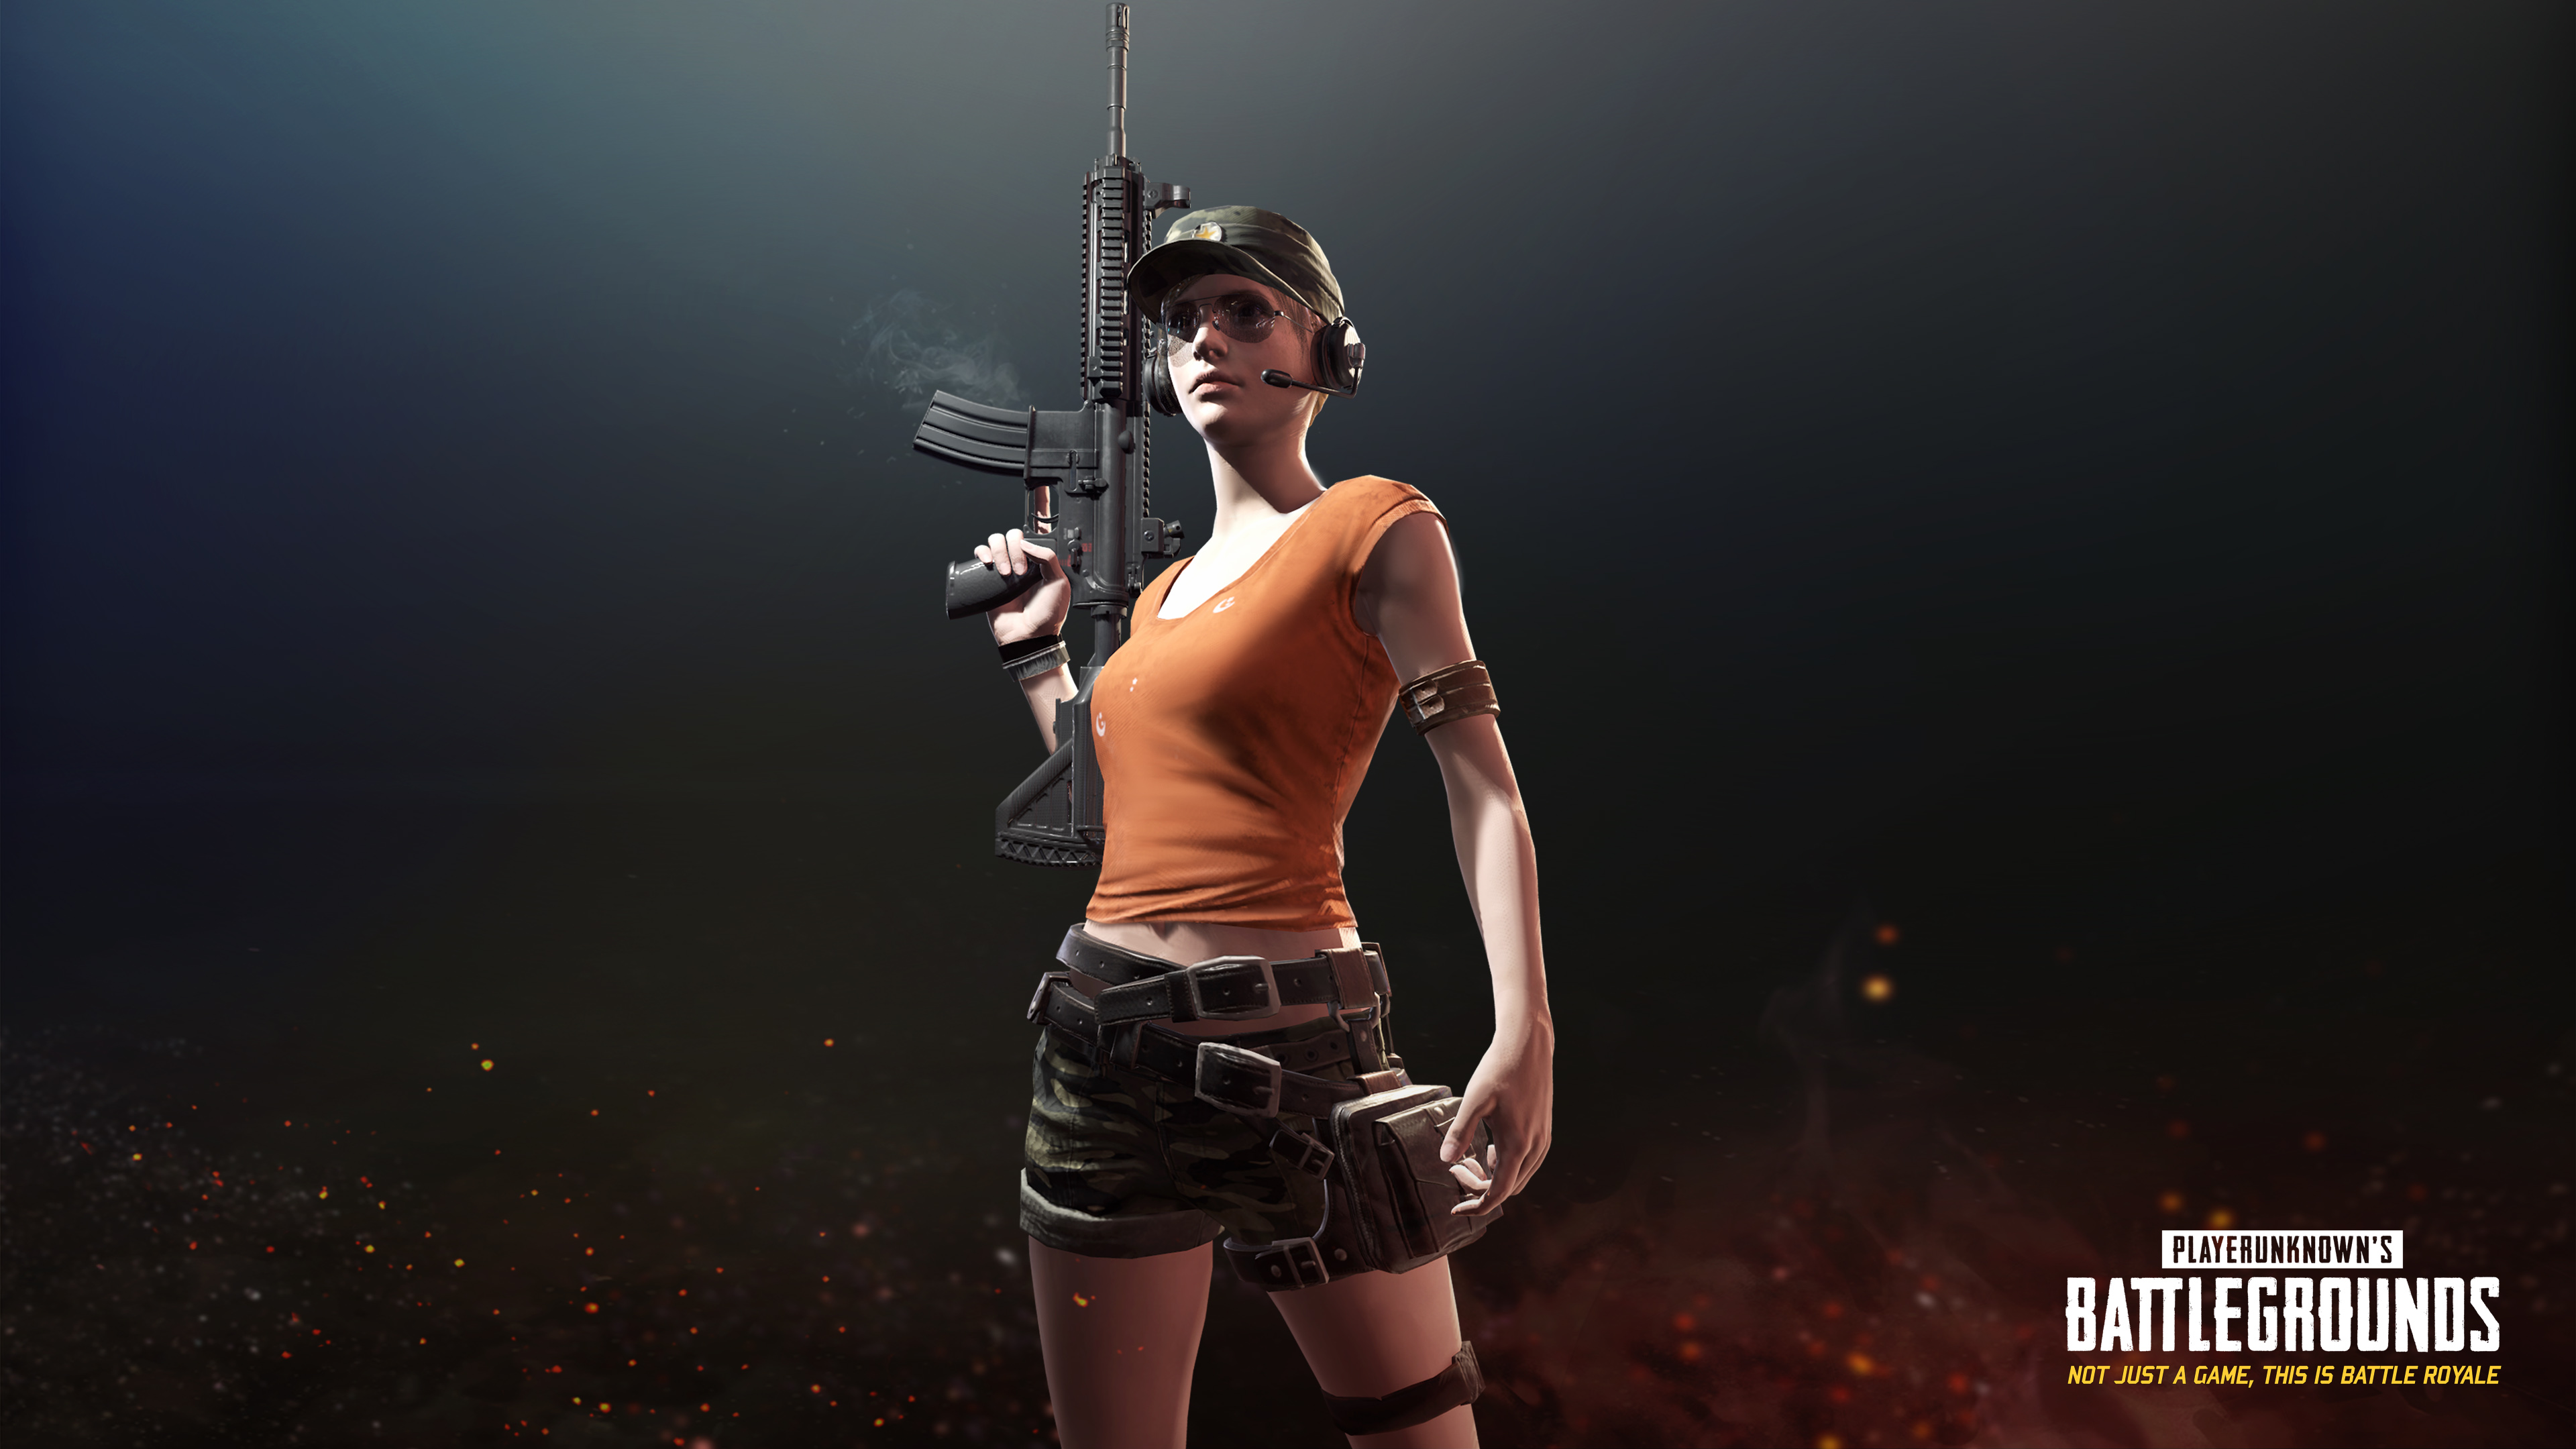 PlayerUnknown's Battlegrounds wallpaper, Picture, Image